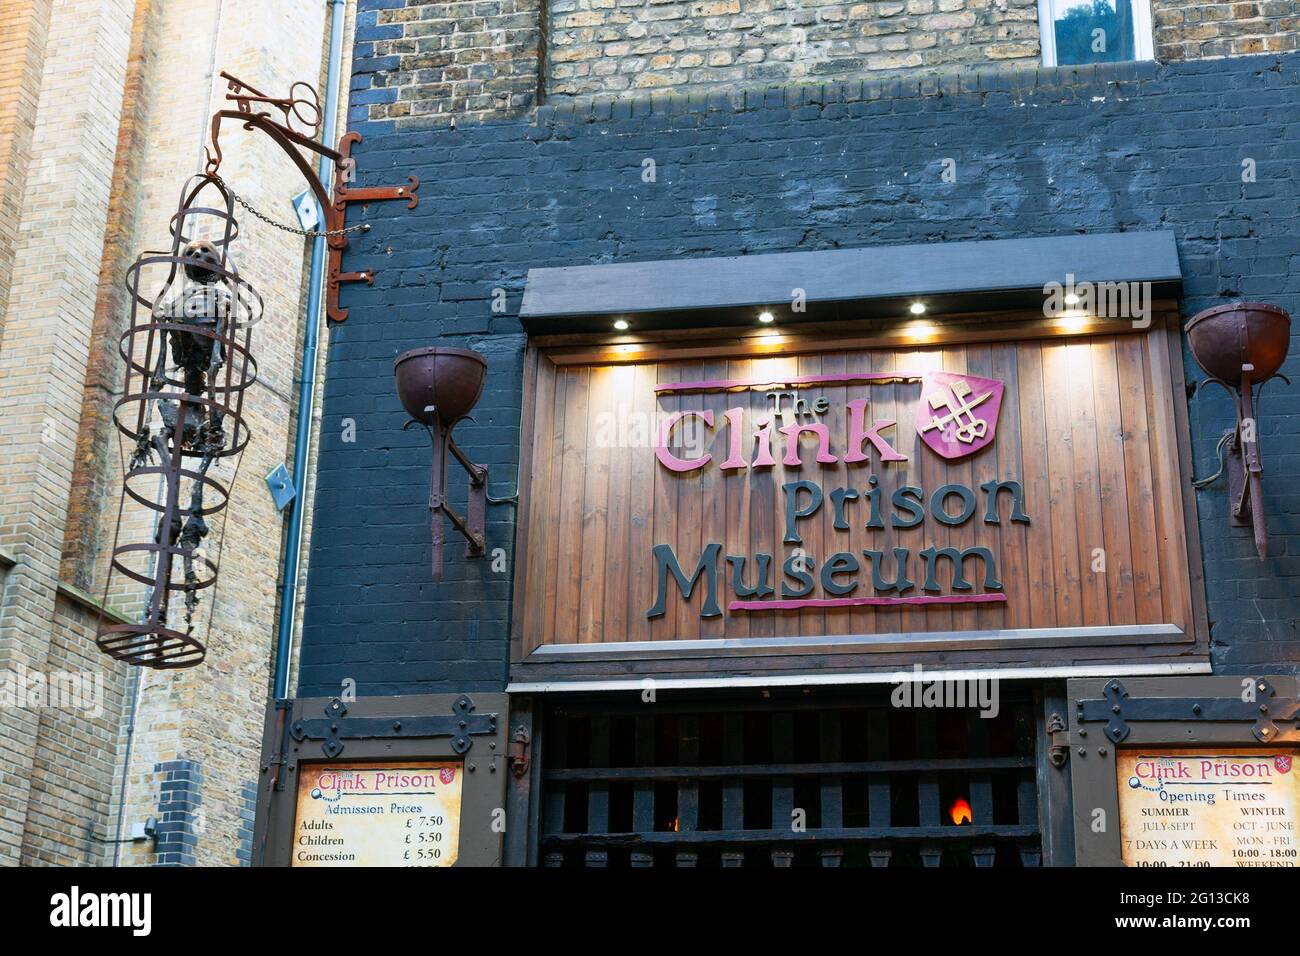 UK, England, London, Southwark, Entrance to 'The Clink' Prison Museum (Sign detail). Stock Photo